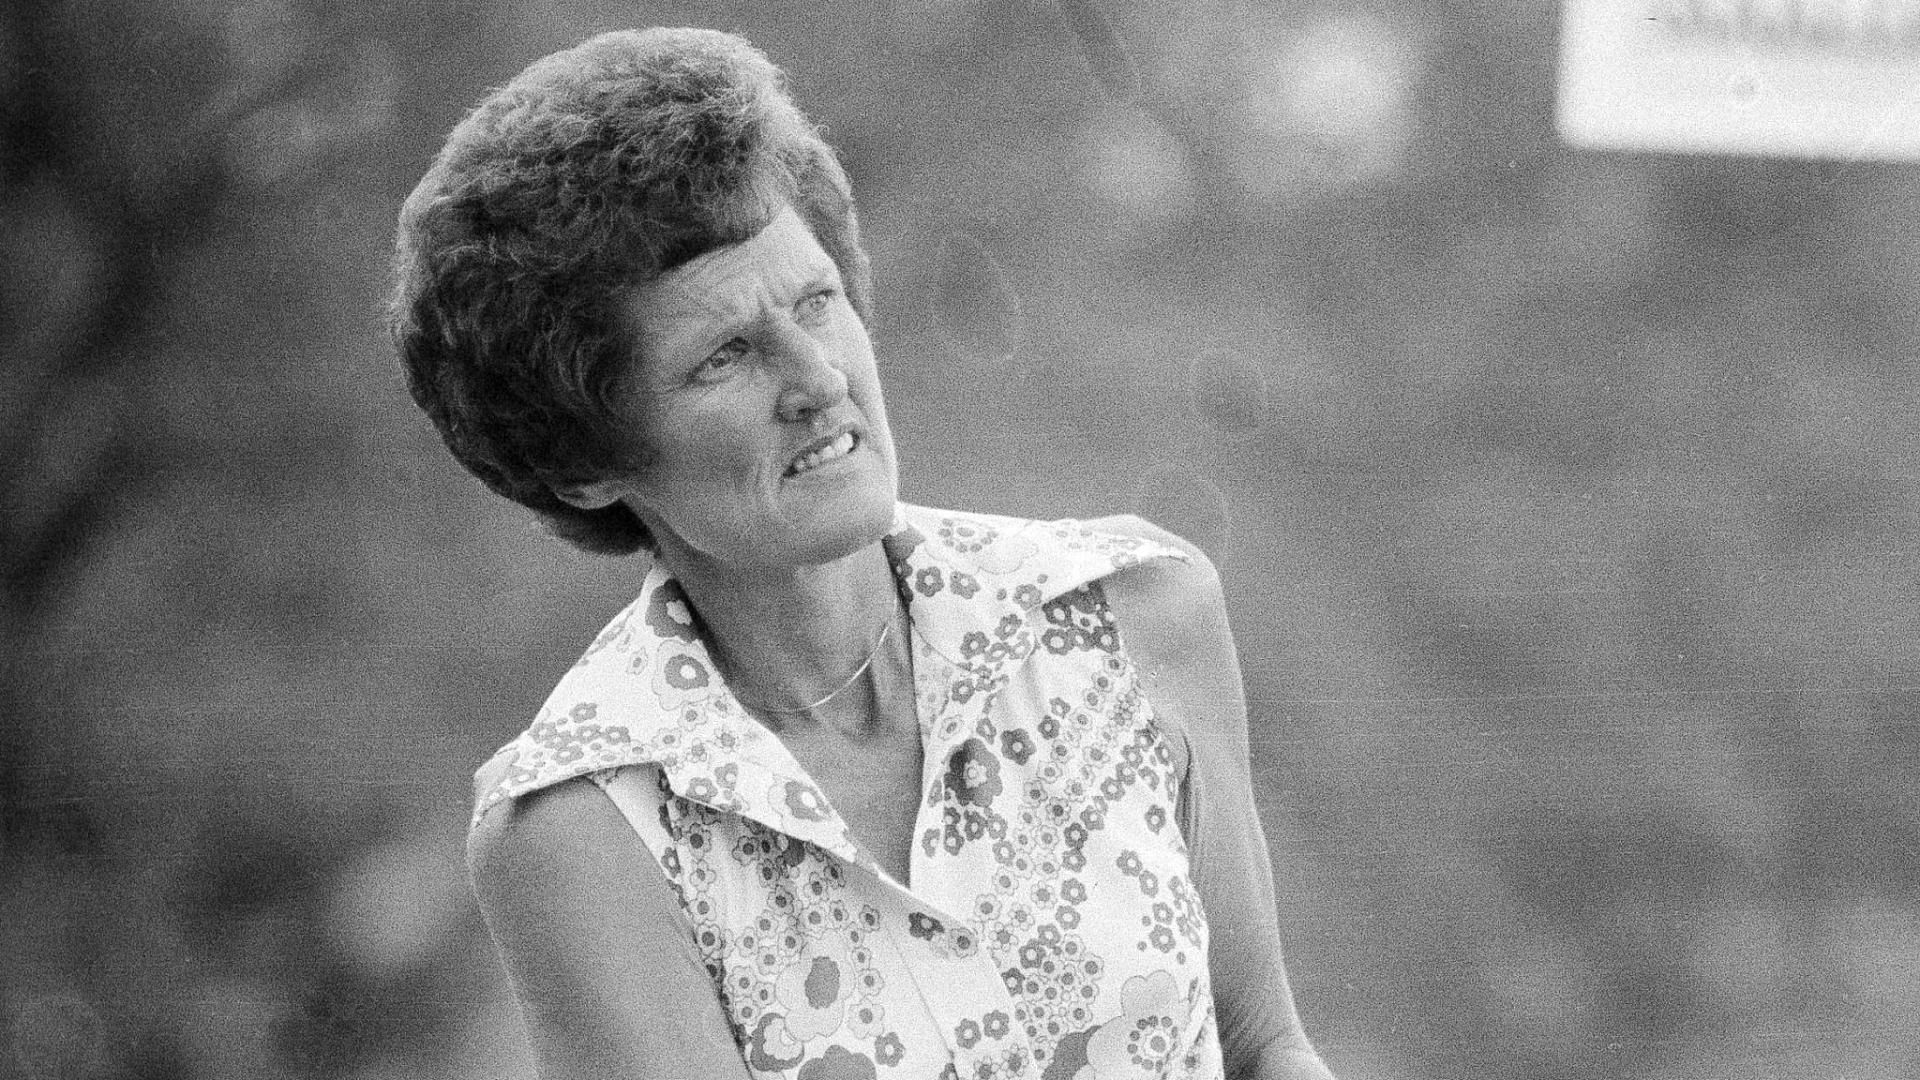 Kathy Whitworth who passed away on 24th holds the record for most holes in one in LPGA(11)